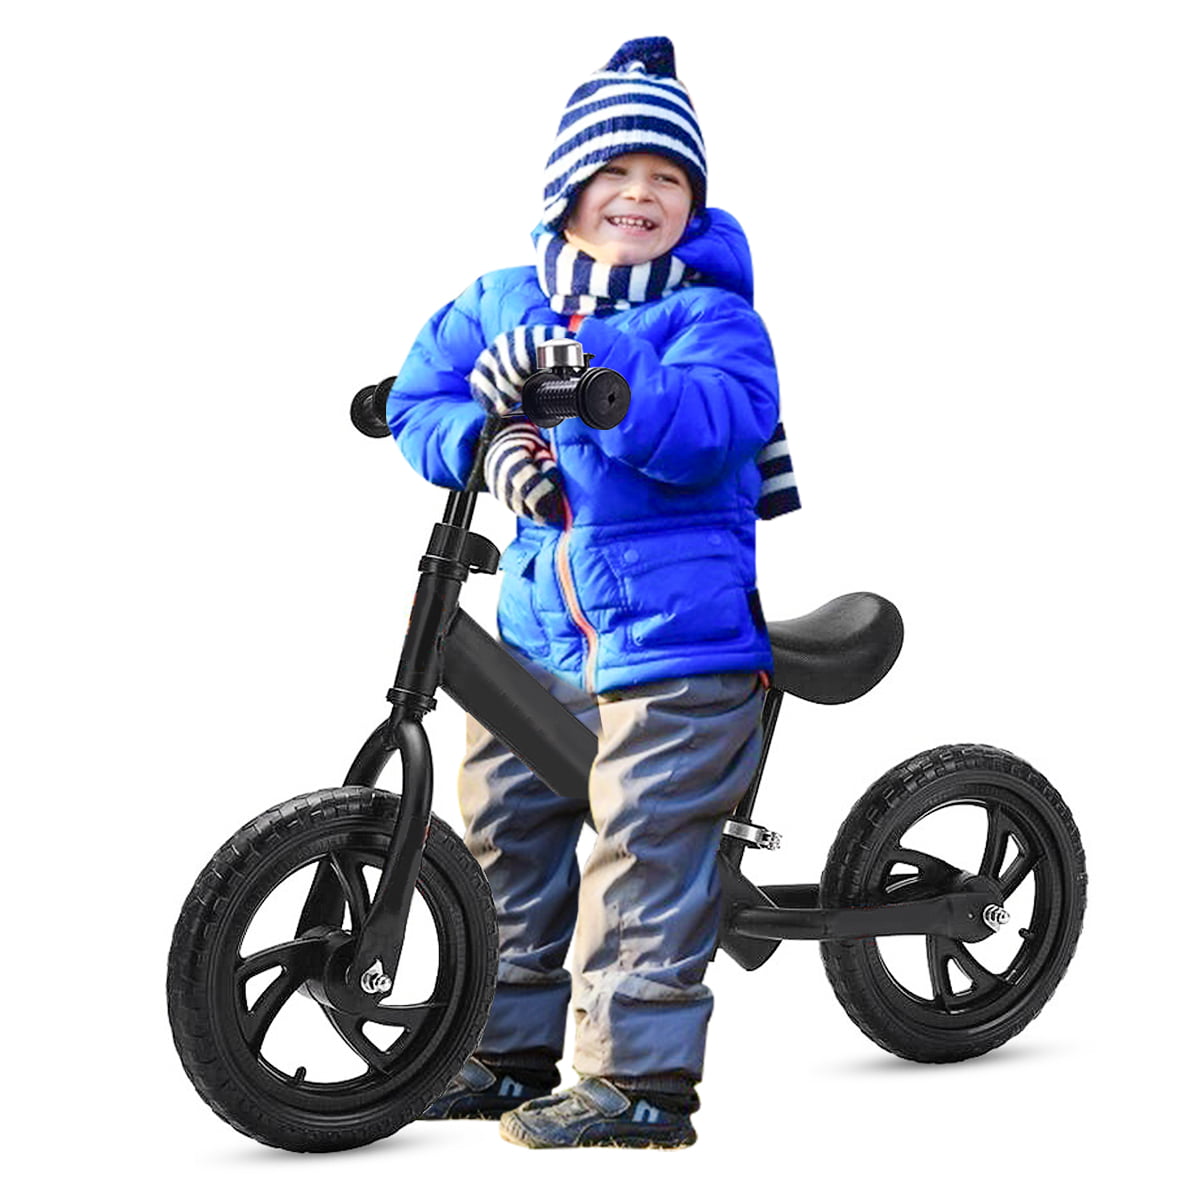 12" Sport Balance Bike, Toddler Training Bike / Kids Push Bikes / No Pedal Scooter Bicycle for Ages 24 Months to 5 Years